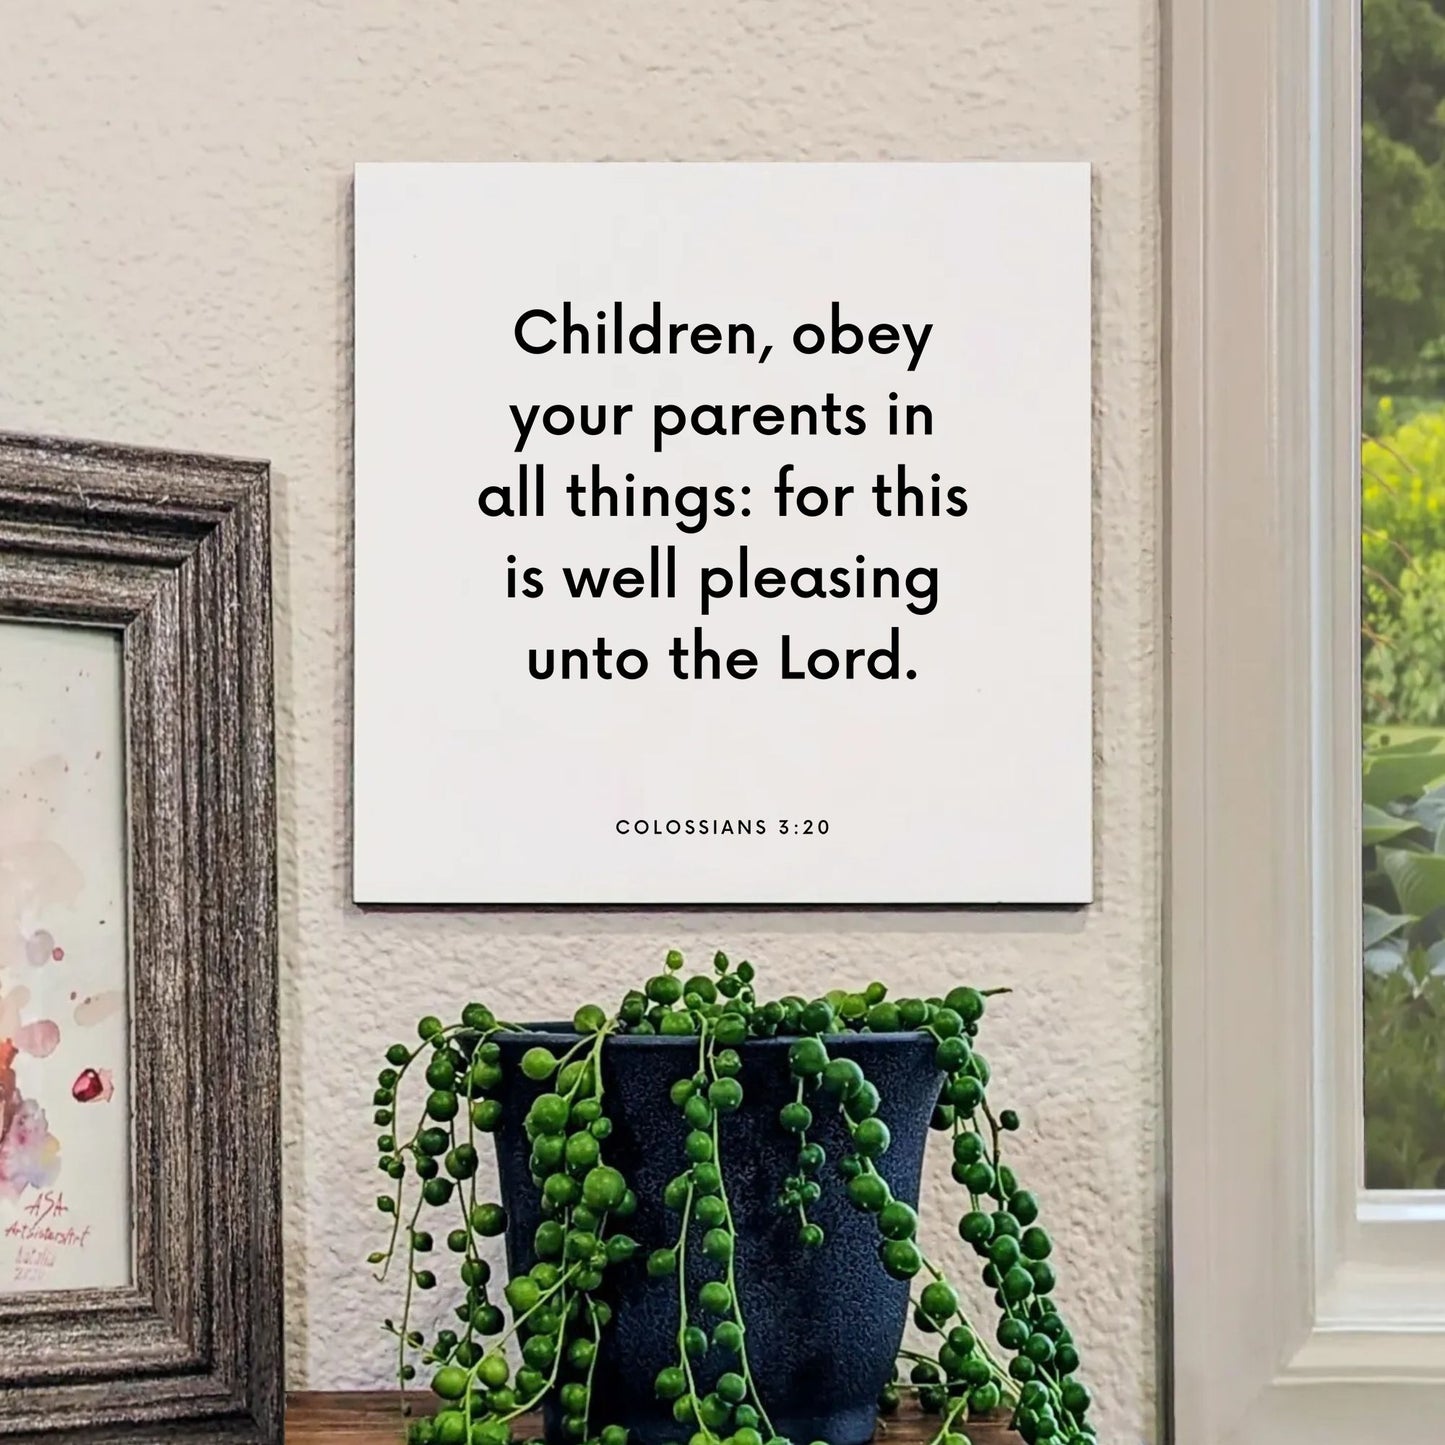 Window mouting of the scripture tile for Colossians 3:20 - "Children, obey your parents in all things"